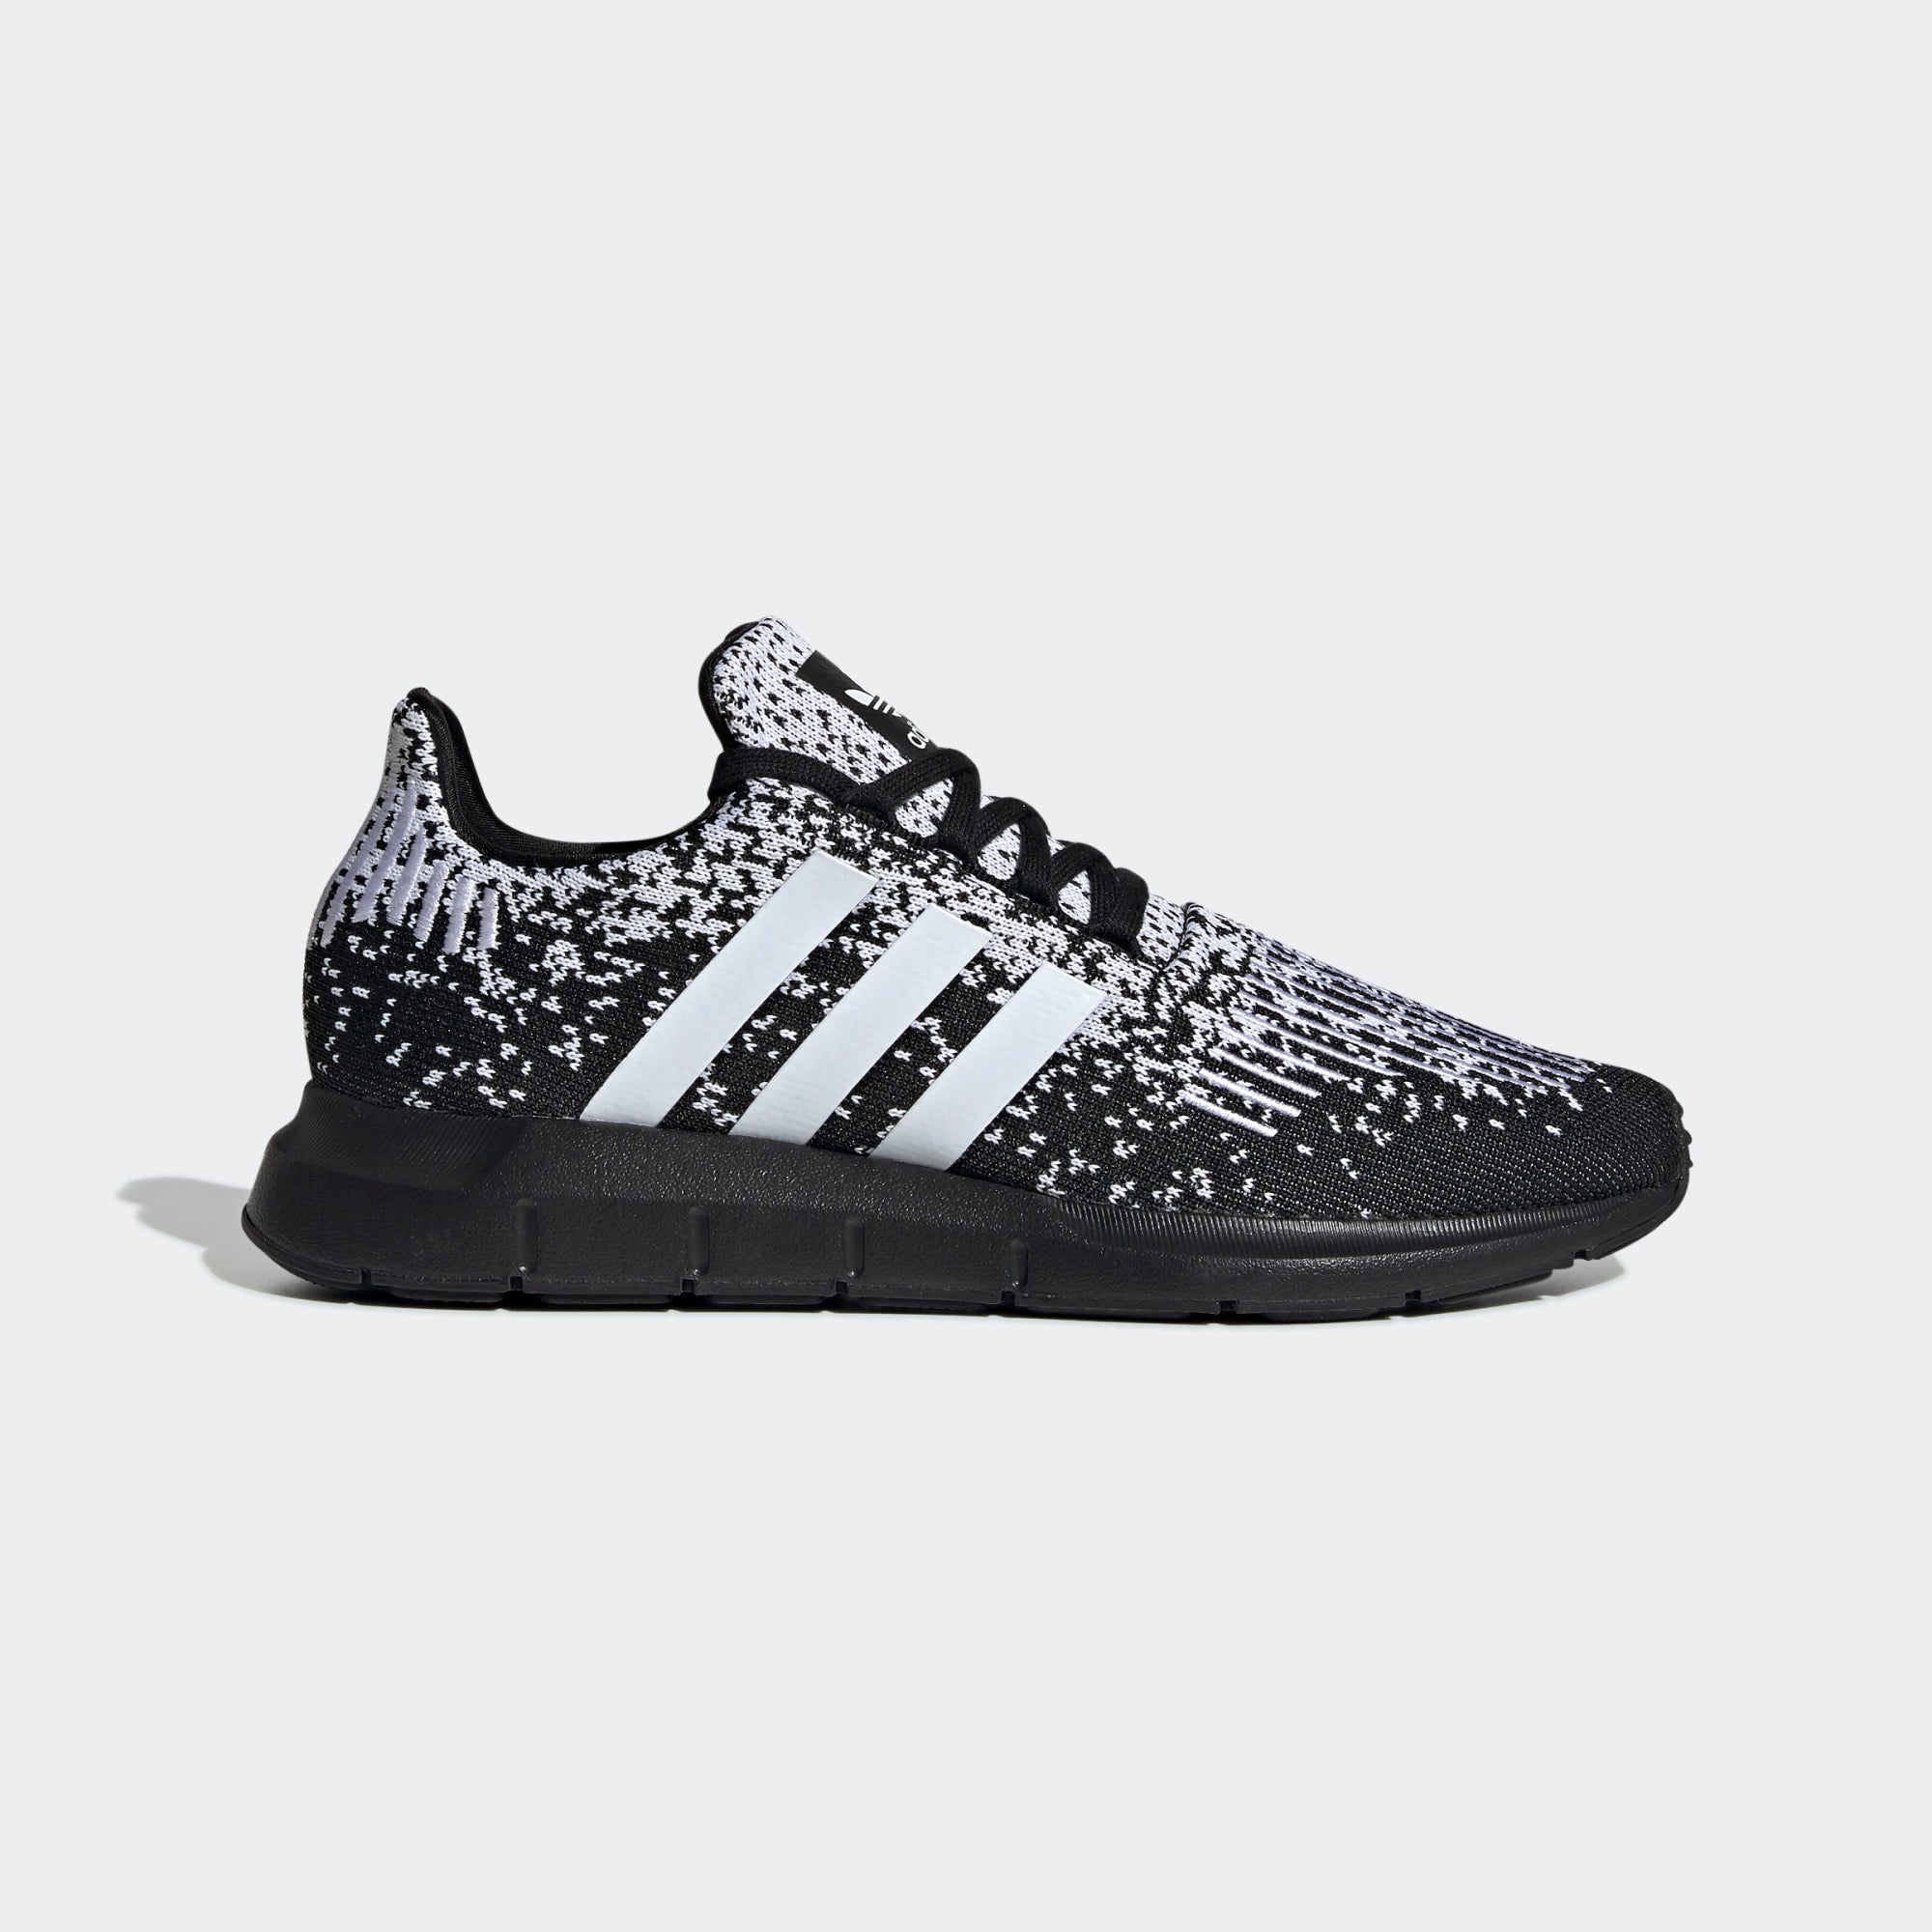 adidas swift run shoes black and white